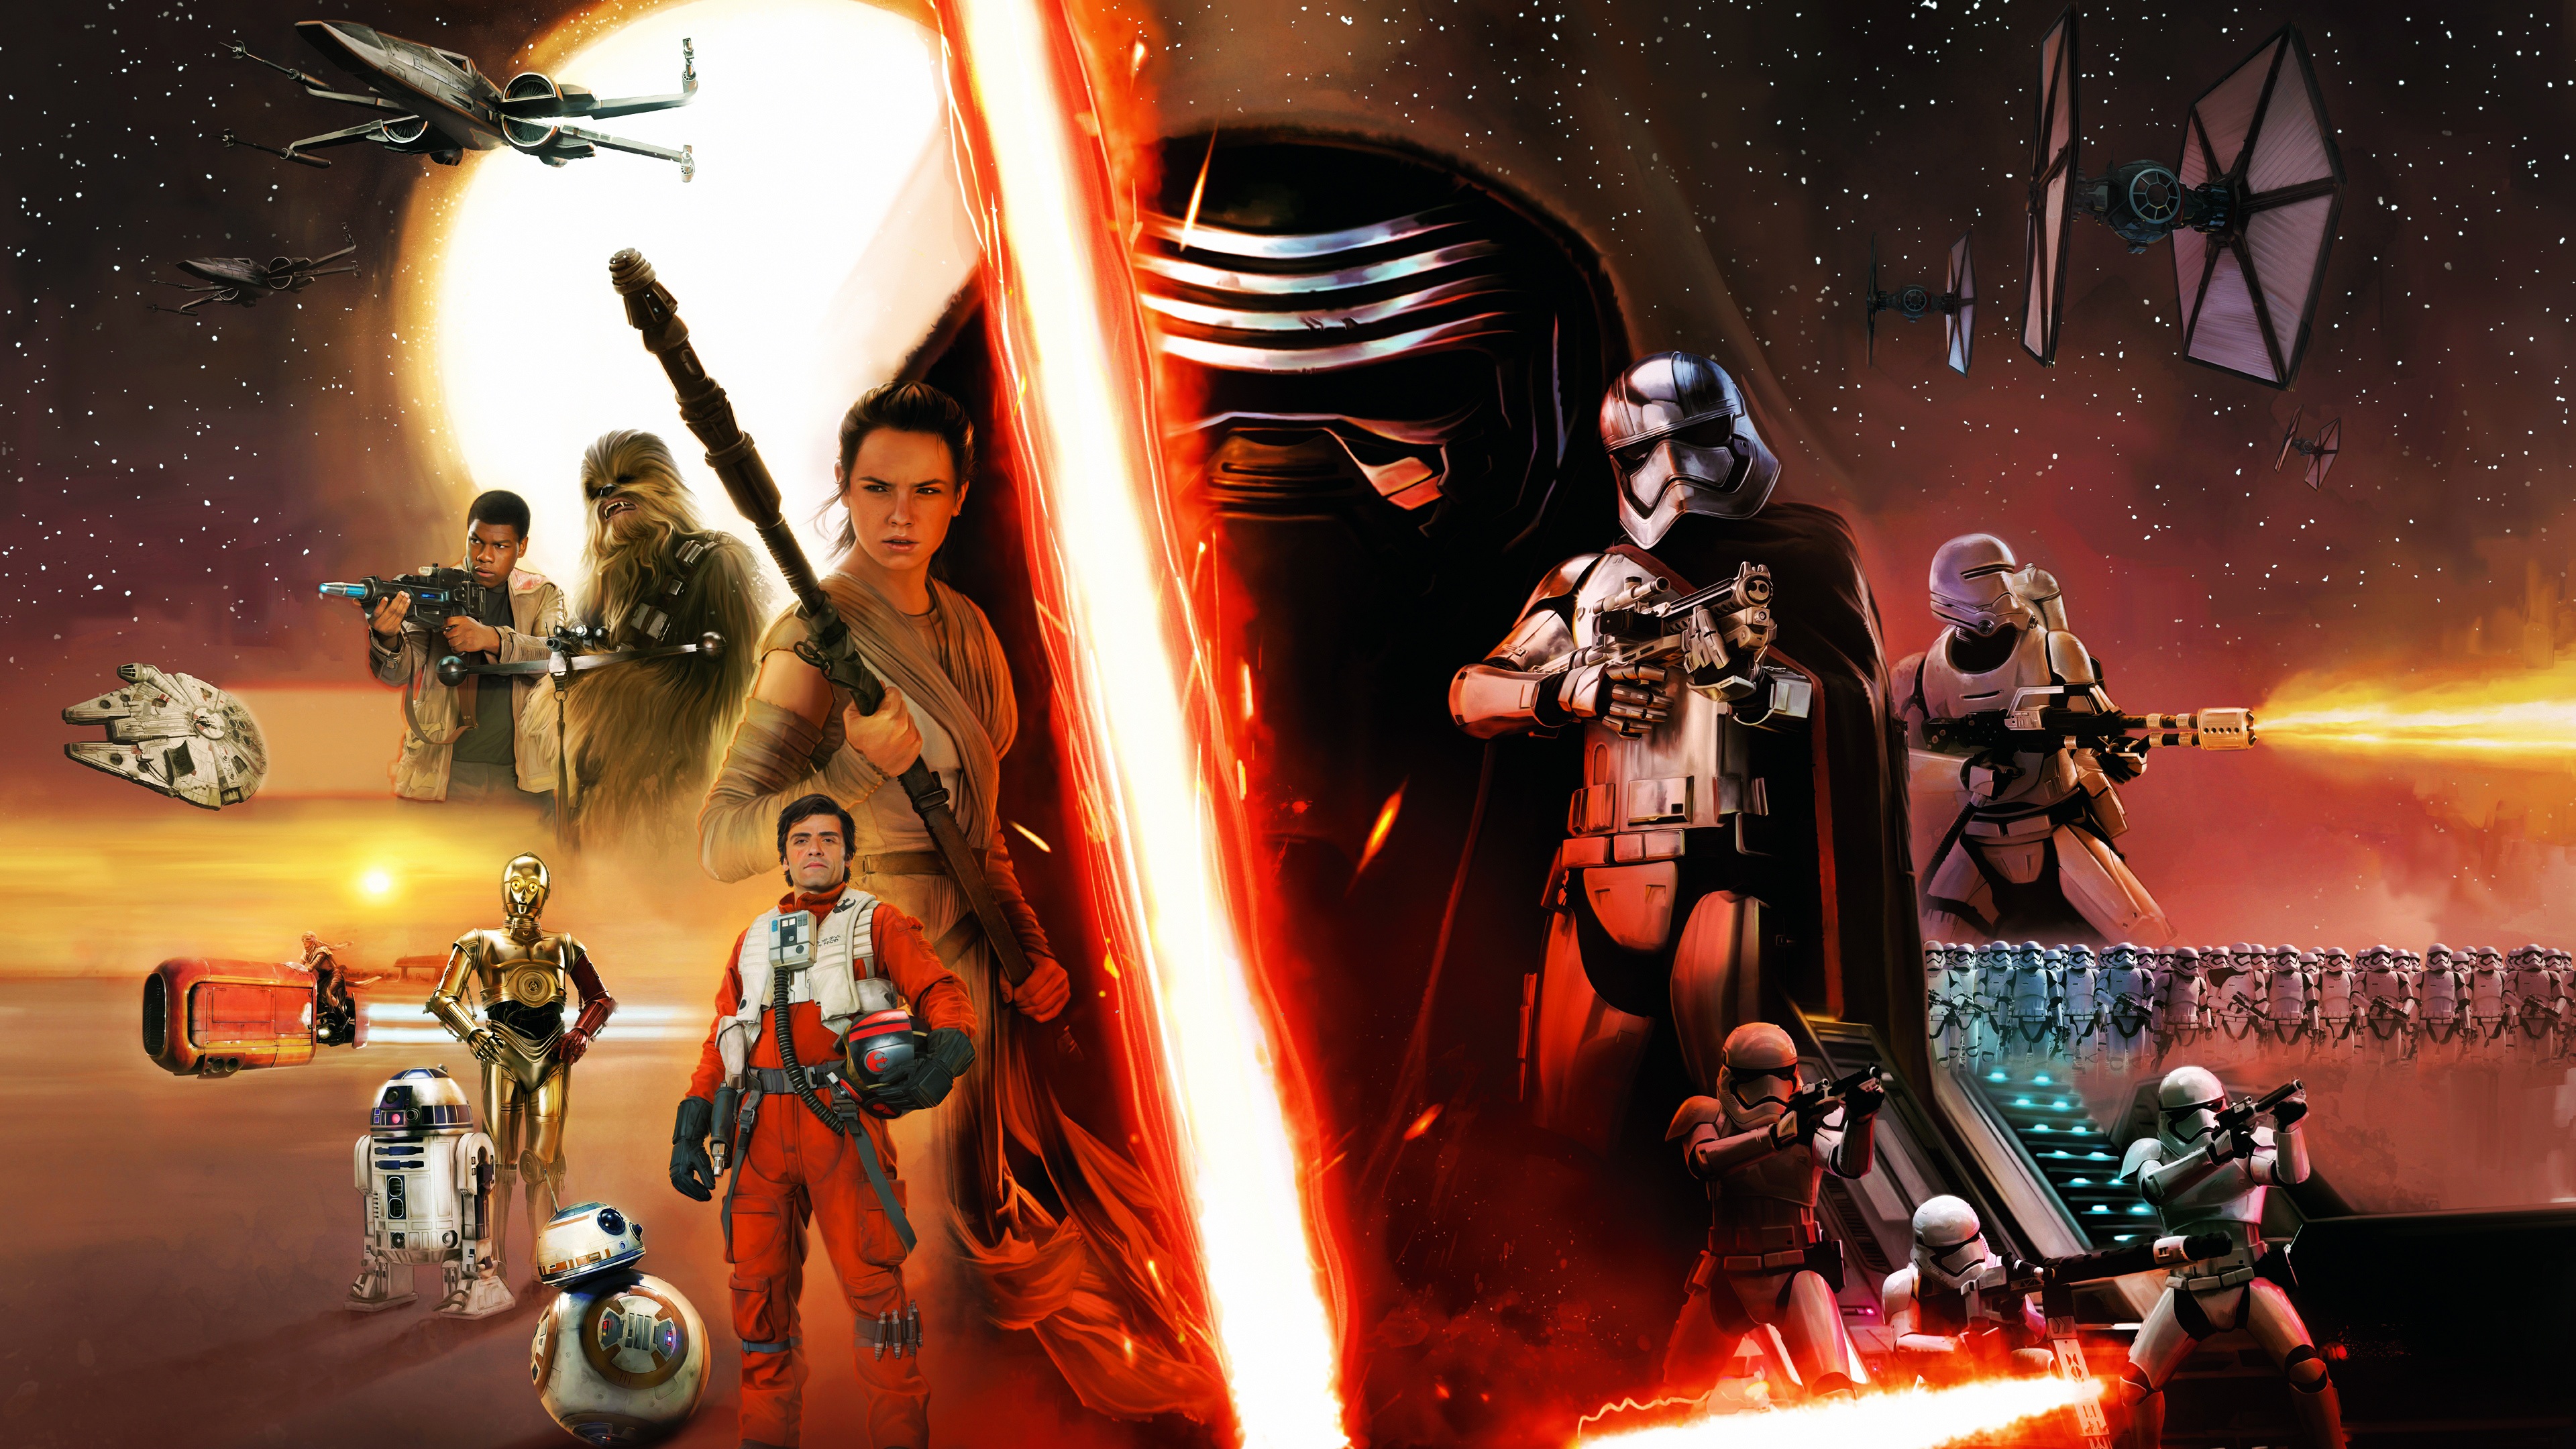 Star Wars Episode VII The Force Awakens Concept Wallpapers HD